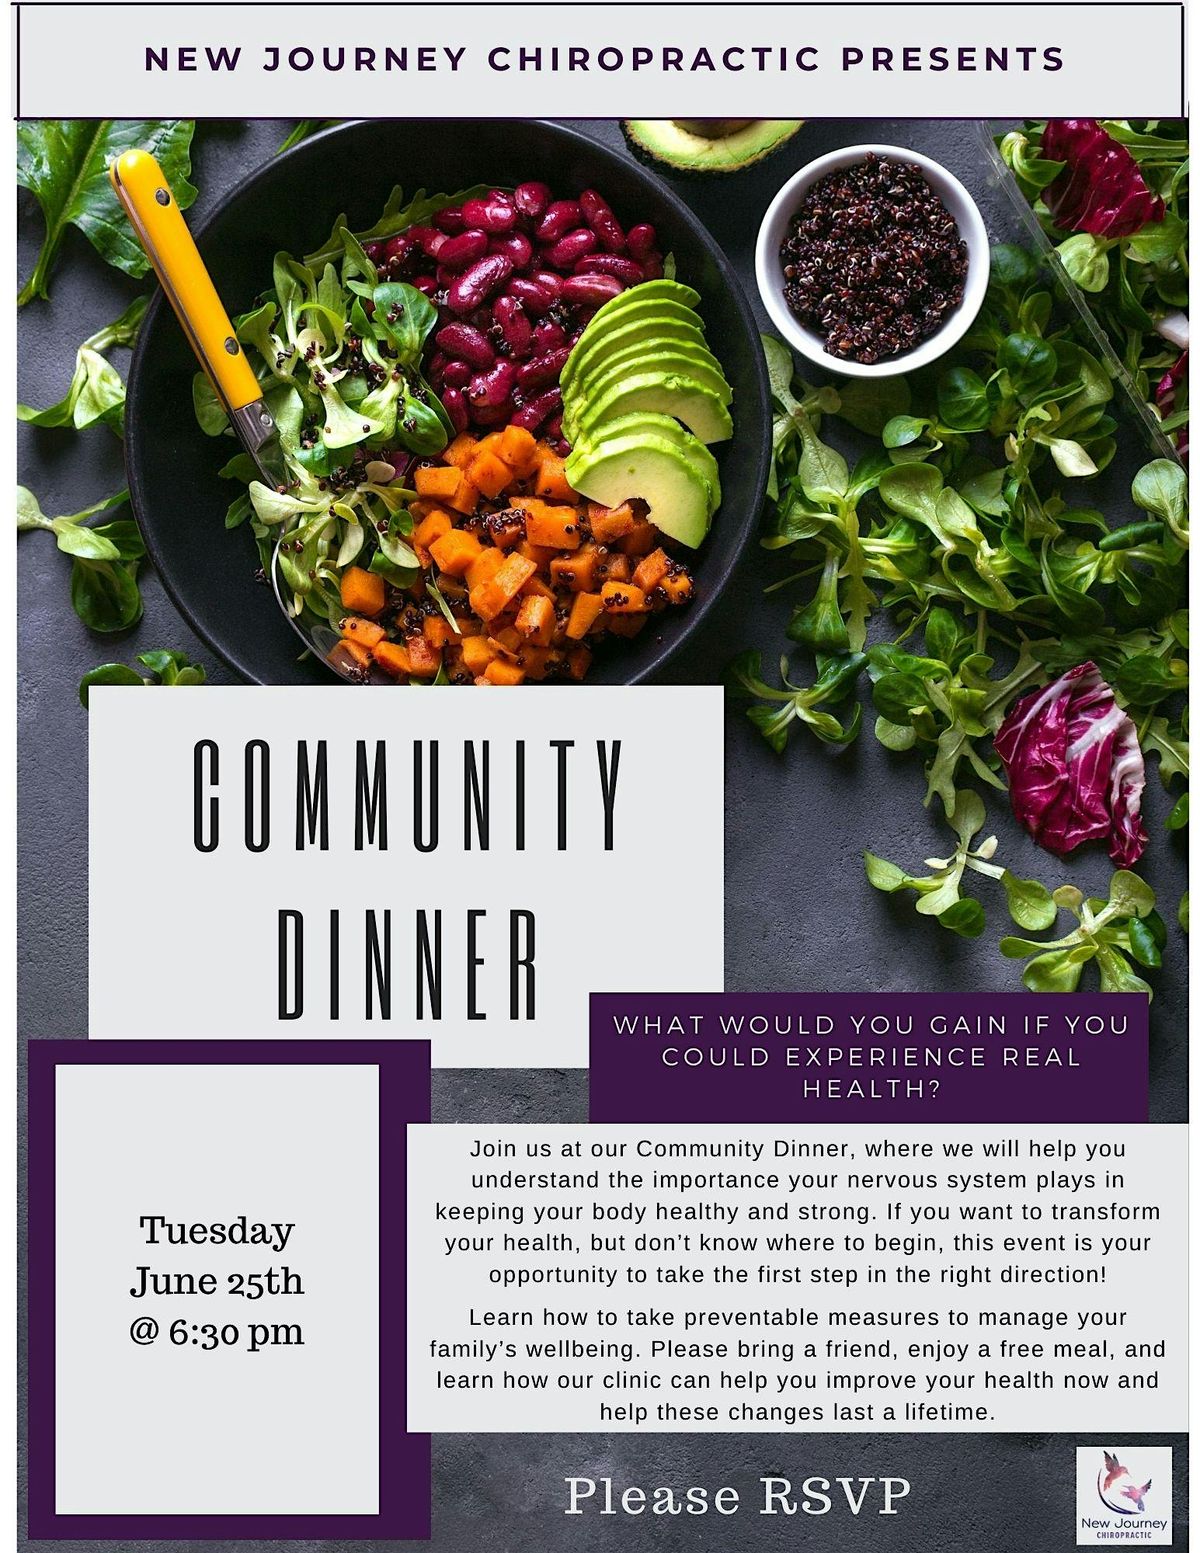 Community Dinner with New Journey Chiropractic